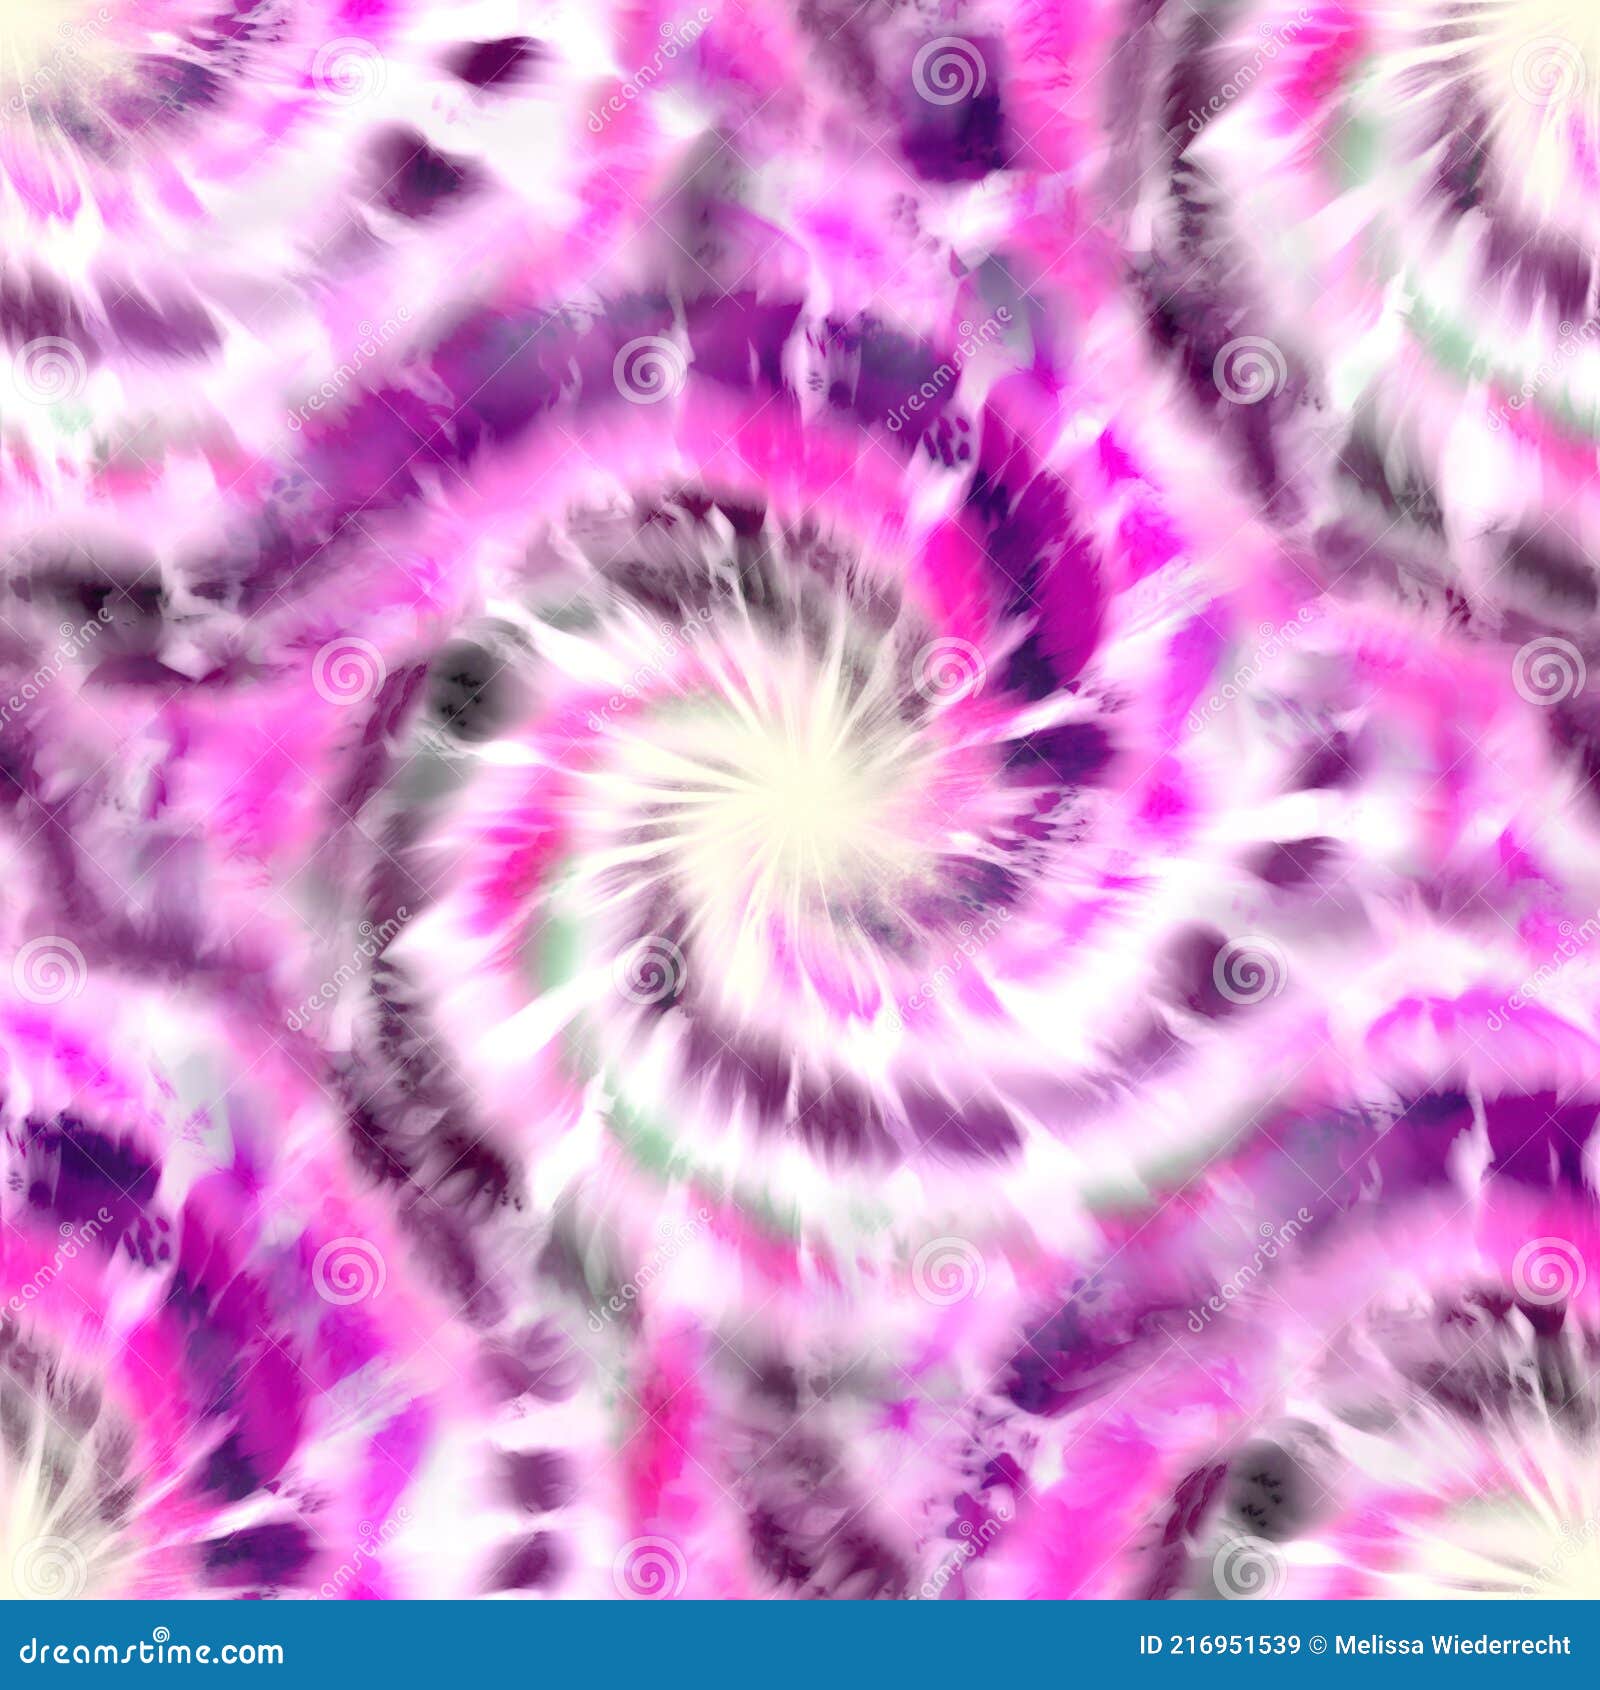 Seamless Spiral Tie Dye Pattern for Surface Design Print Stock ...